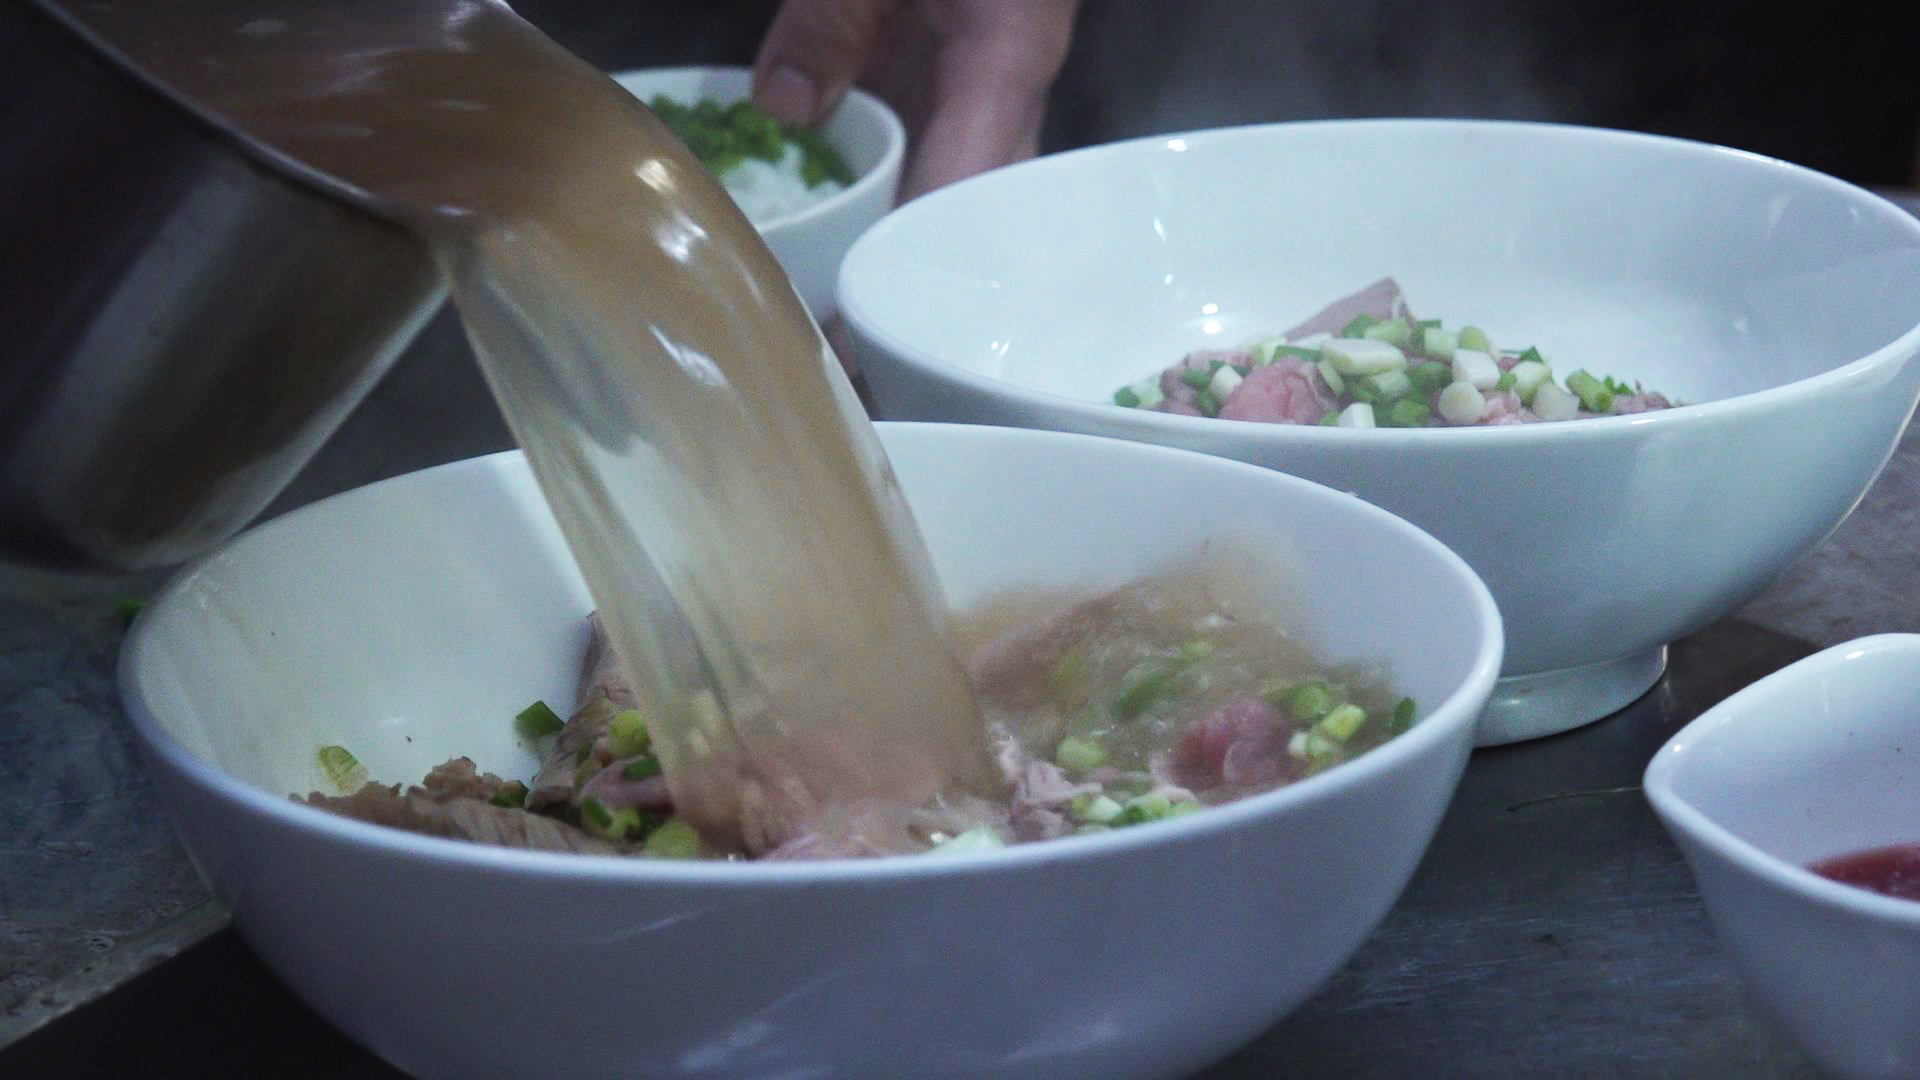 Northern-style pho restaurant serves customers for six decades in Saigon